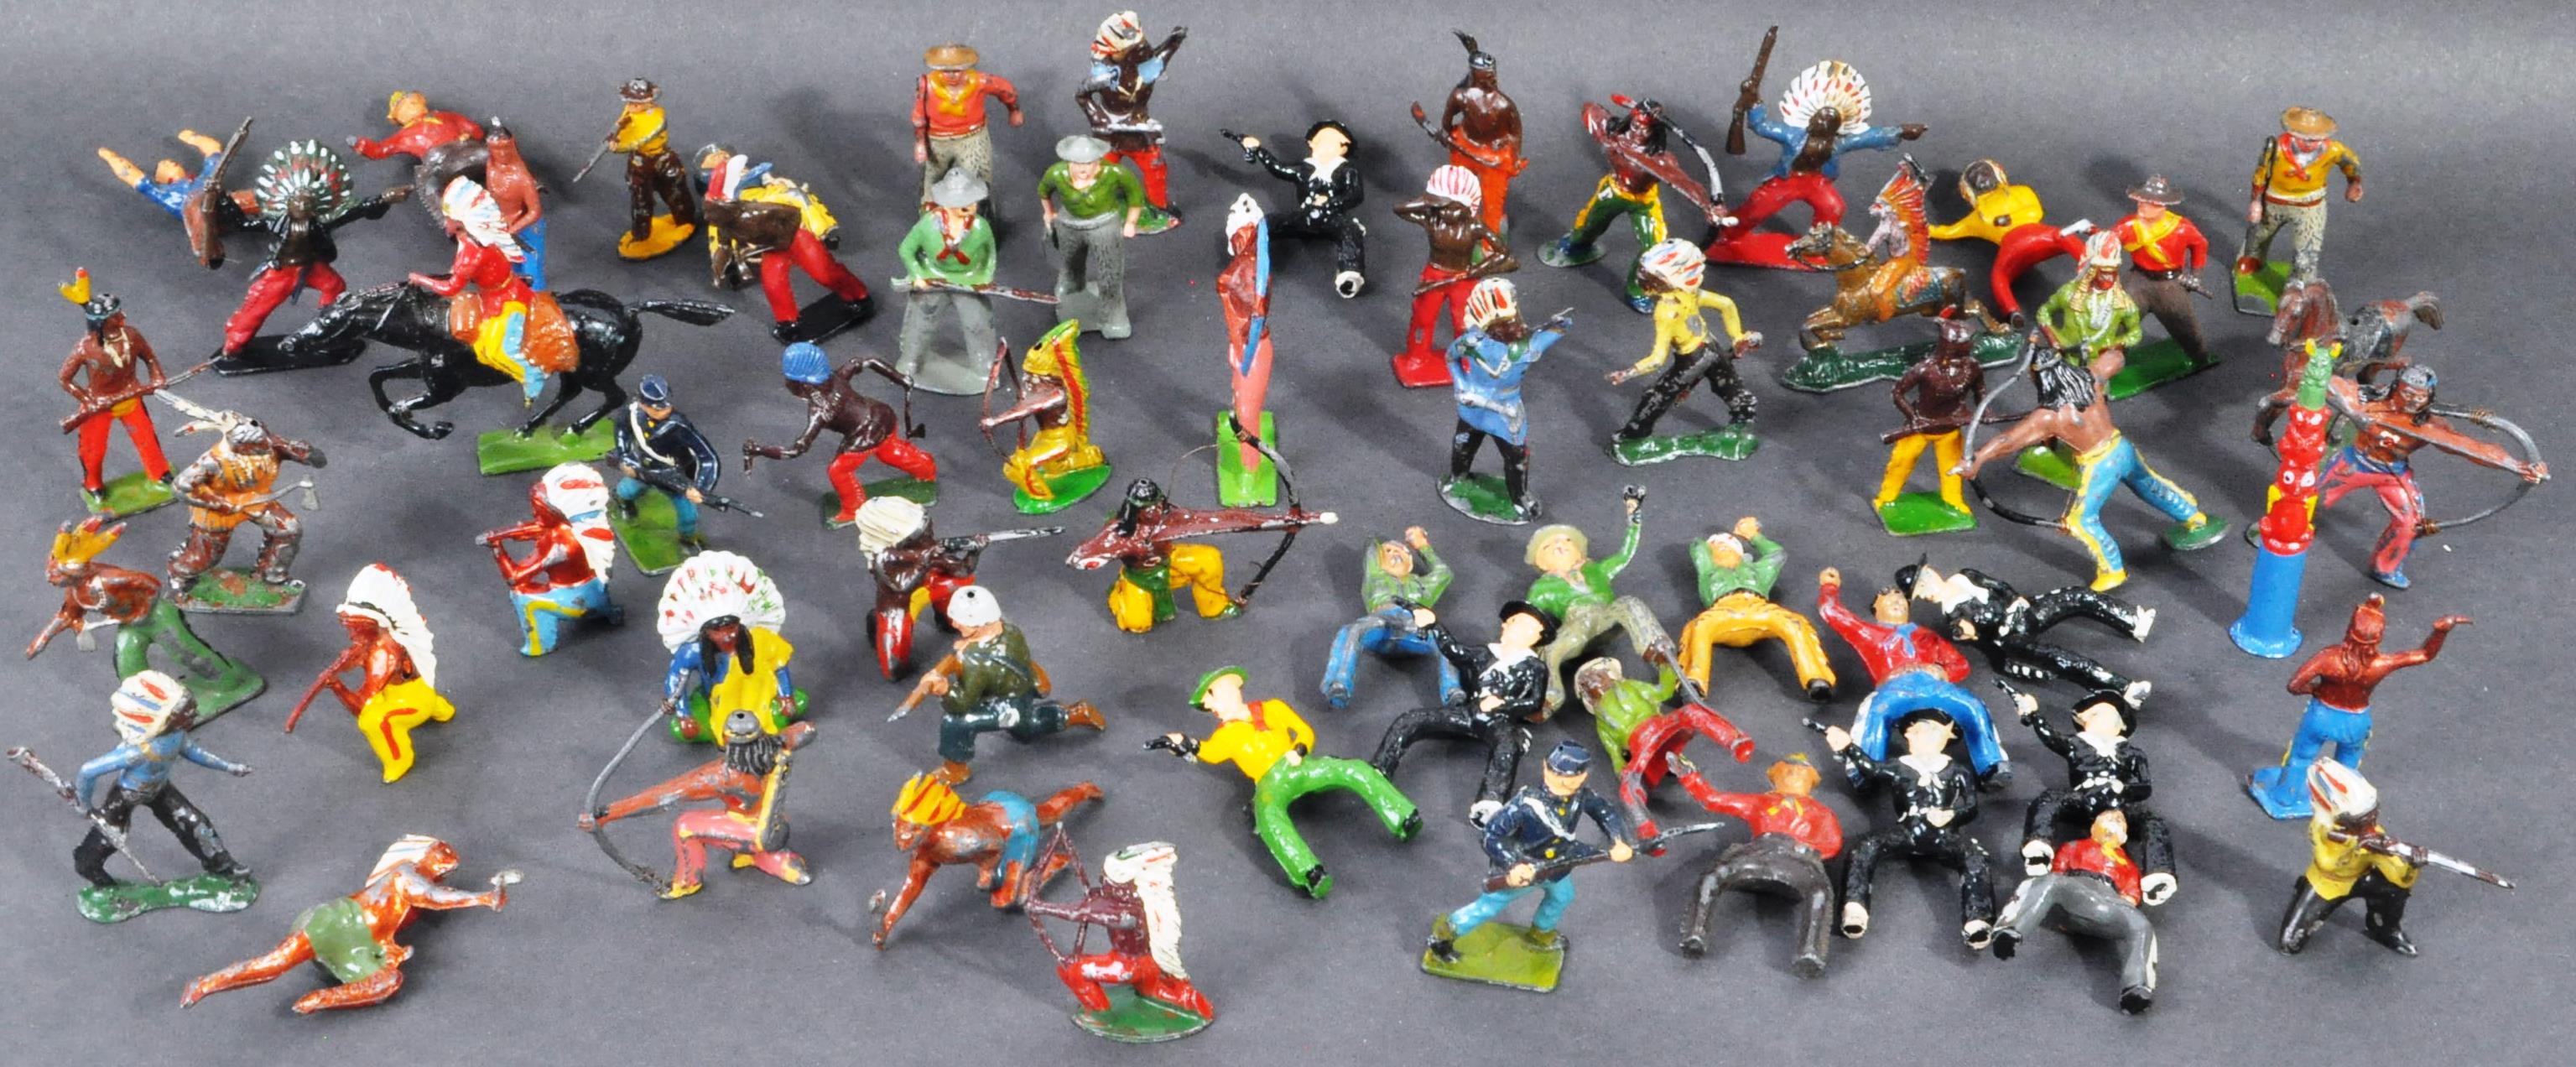 LEAD FIGURES - COLLECTION OF COWBOYS & INDIANS